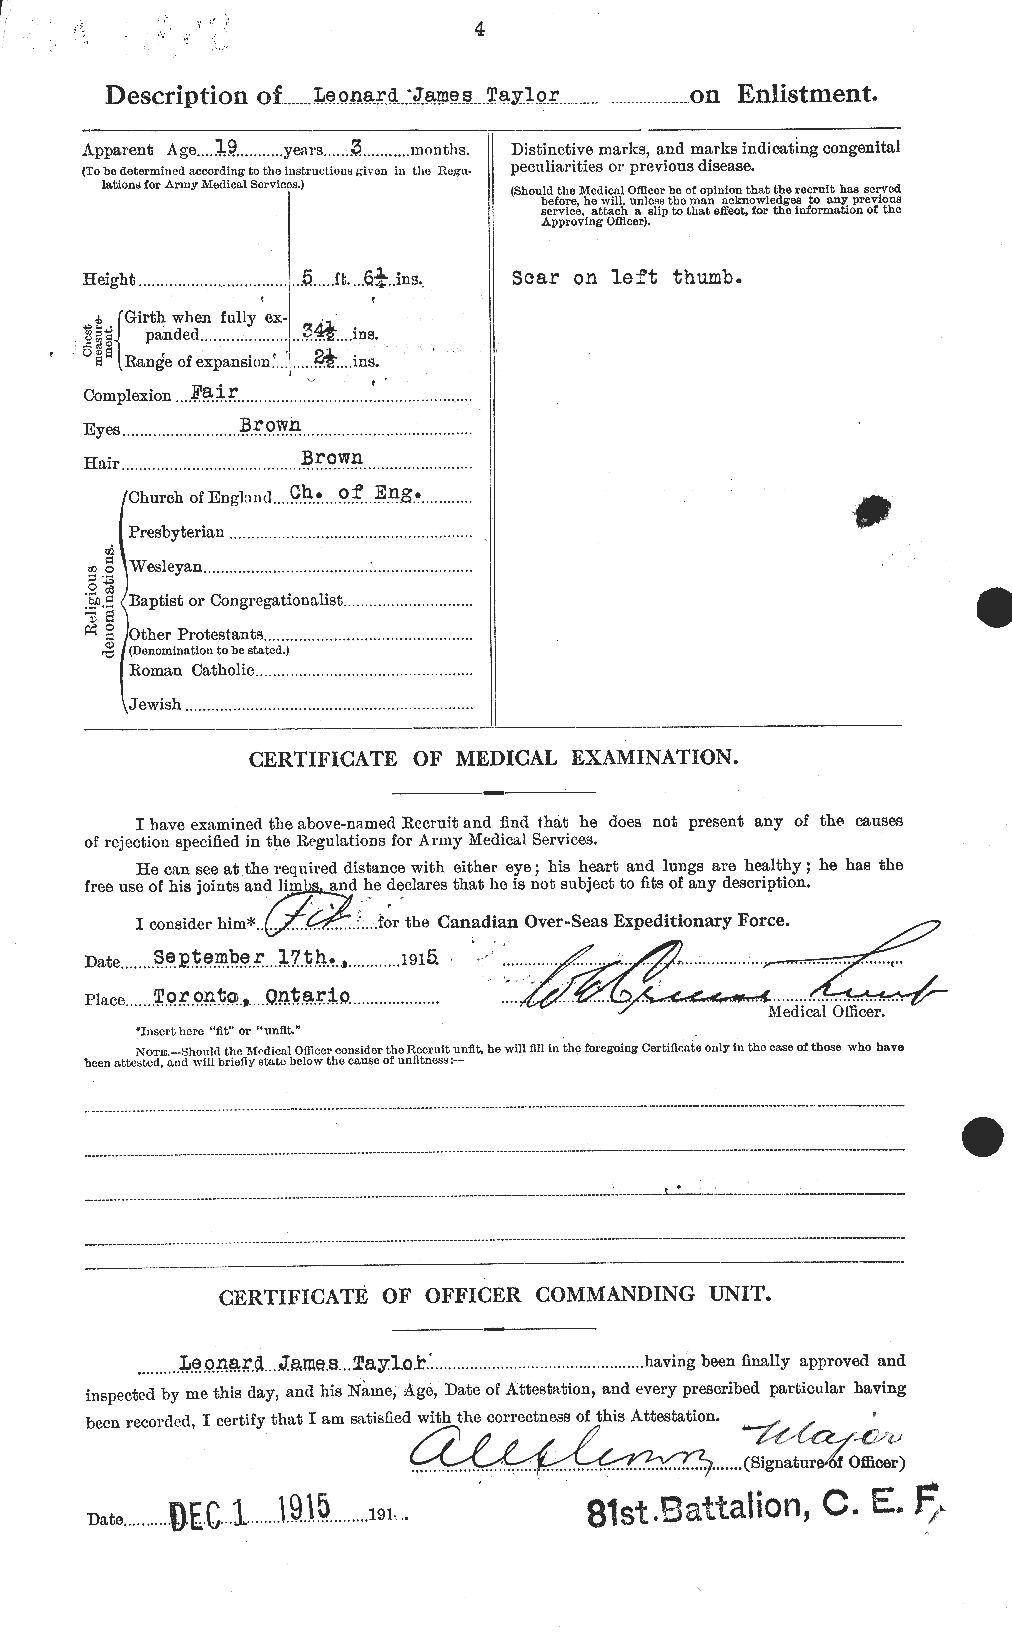 Personnel Records of the First World War - CEF 627630b